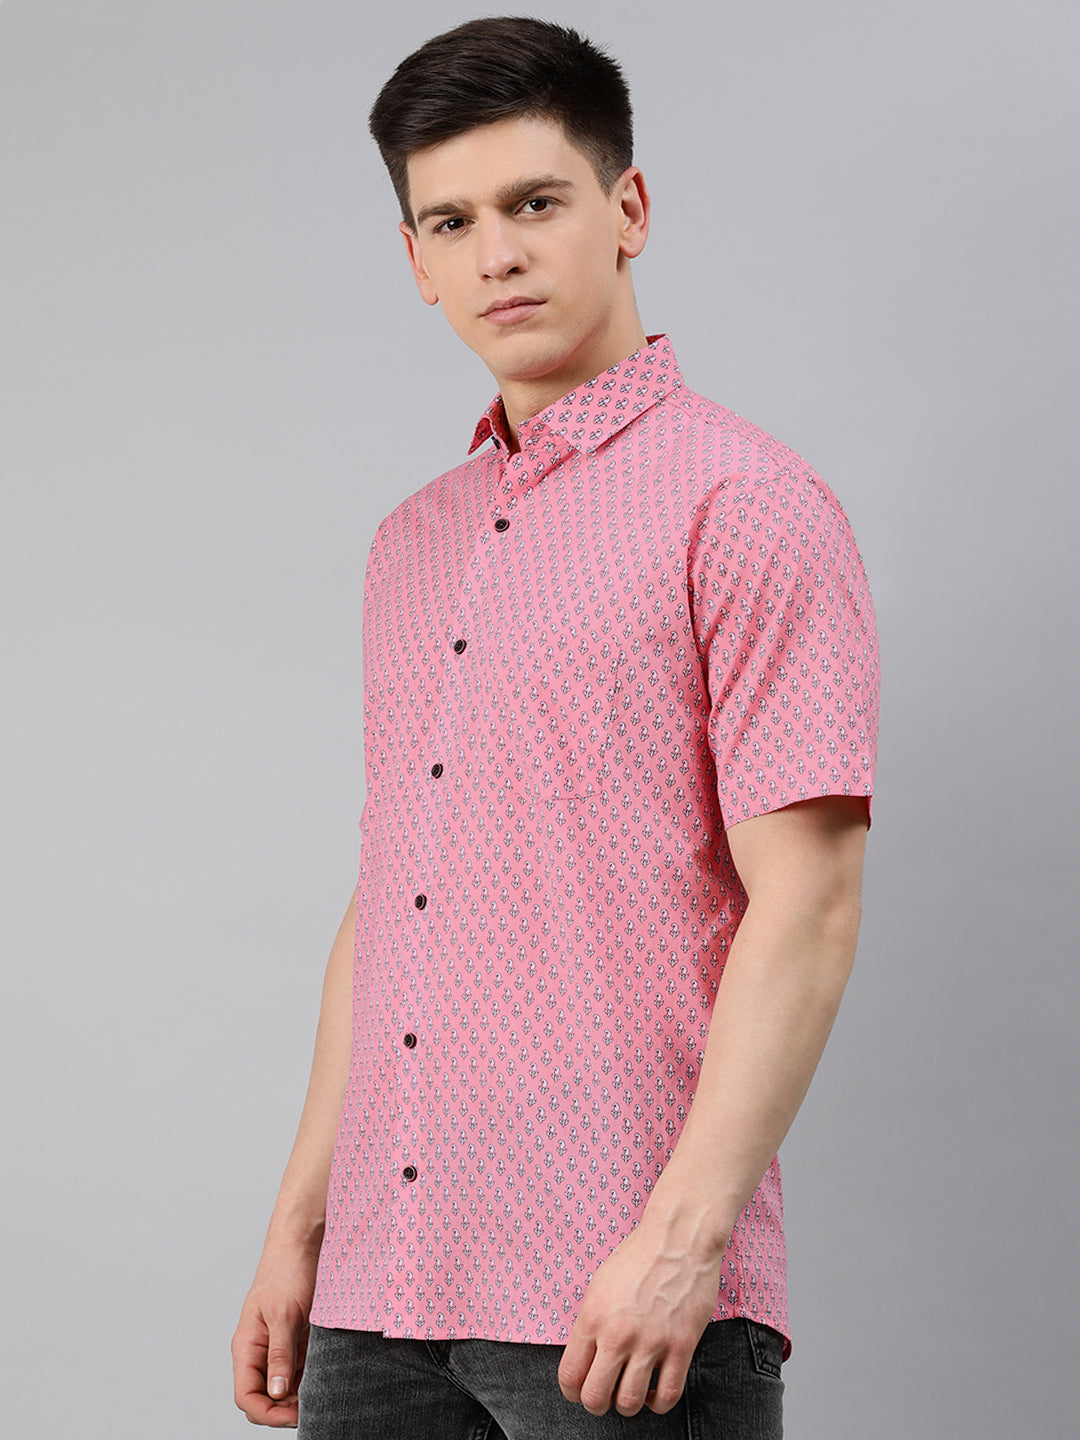 Pink Cotton Short Sleeves Shirts For Men